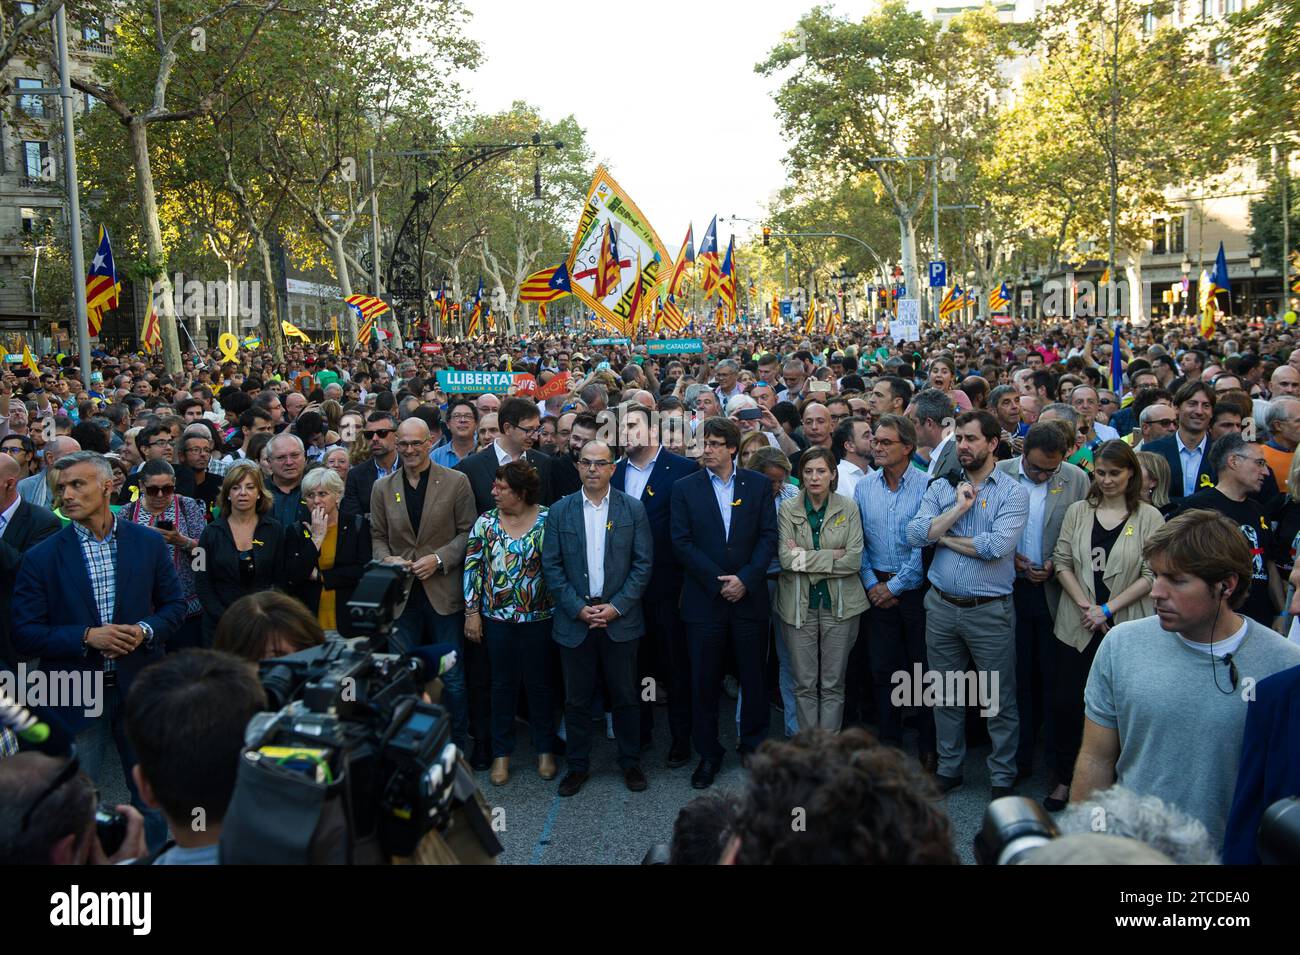 Barcelona, 10/21/2017. Demonstration against the imprisonment of Jordi Cuixart and Jordi Sánchez on the day that Mariano Rajoy confirmed number 155. Photo: Inés Baucells. ARCHDC. Credit: Album / Archivo ABC / Inés Baucells Stock Photo